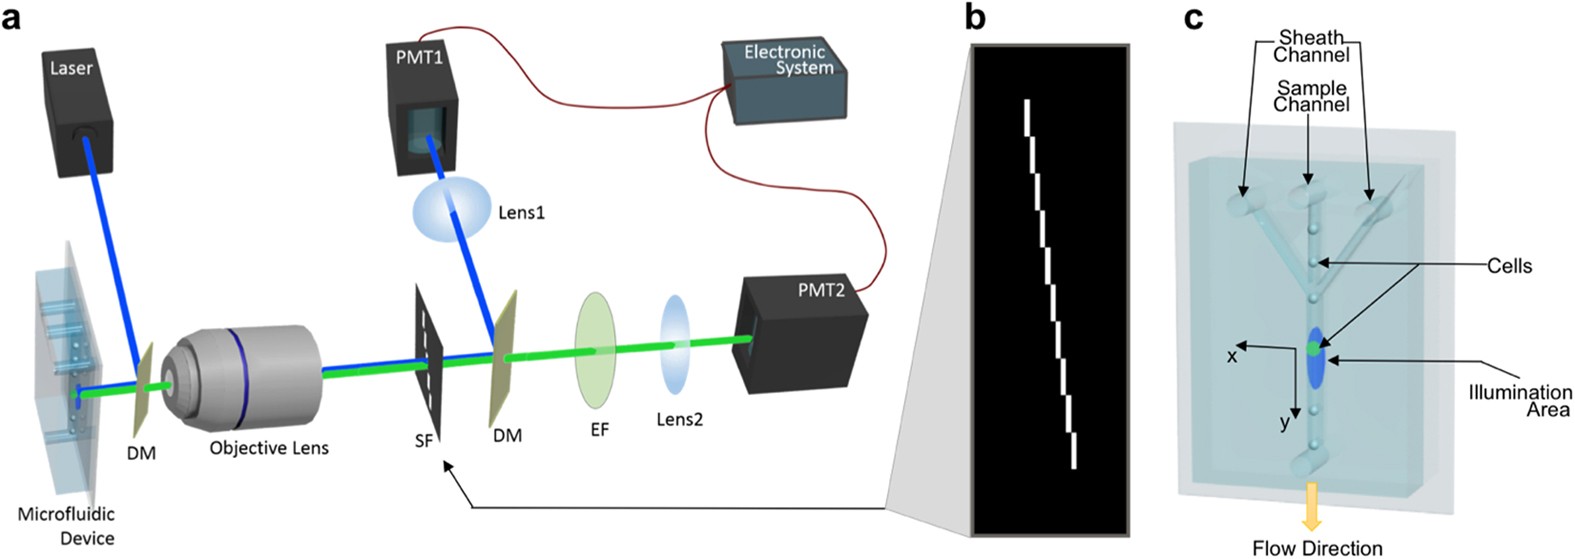 Imaging Cells in Flow Cytometer Using Spatial-Temporal Transformation